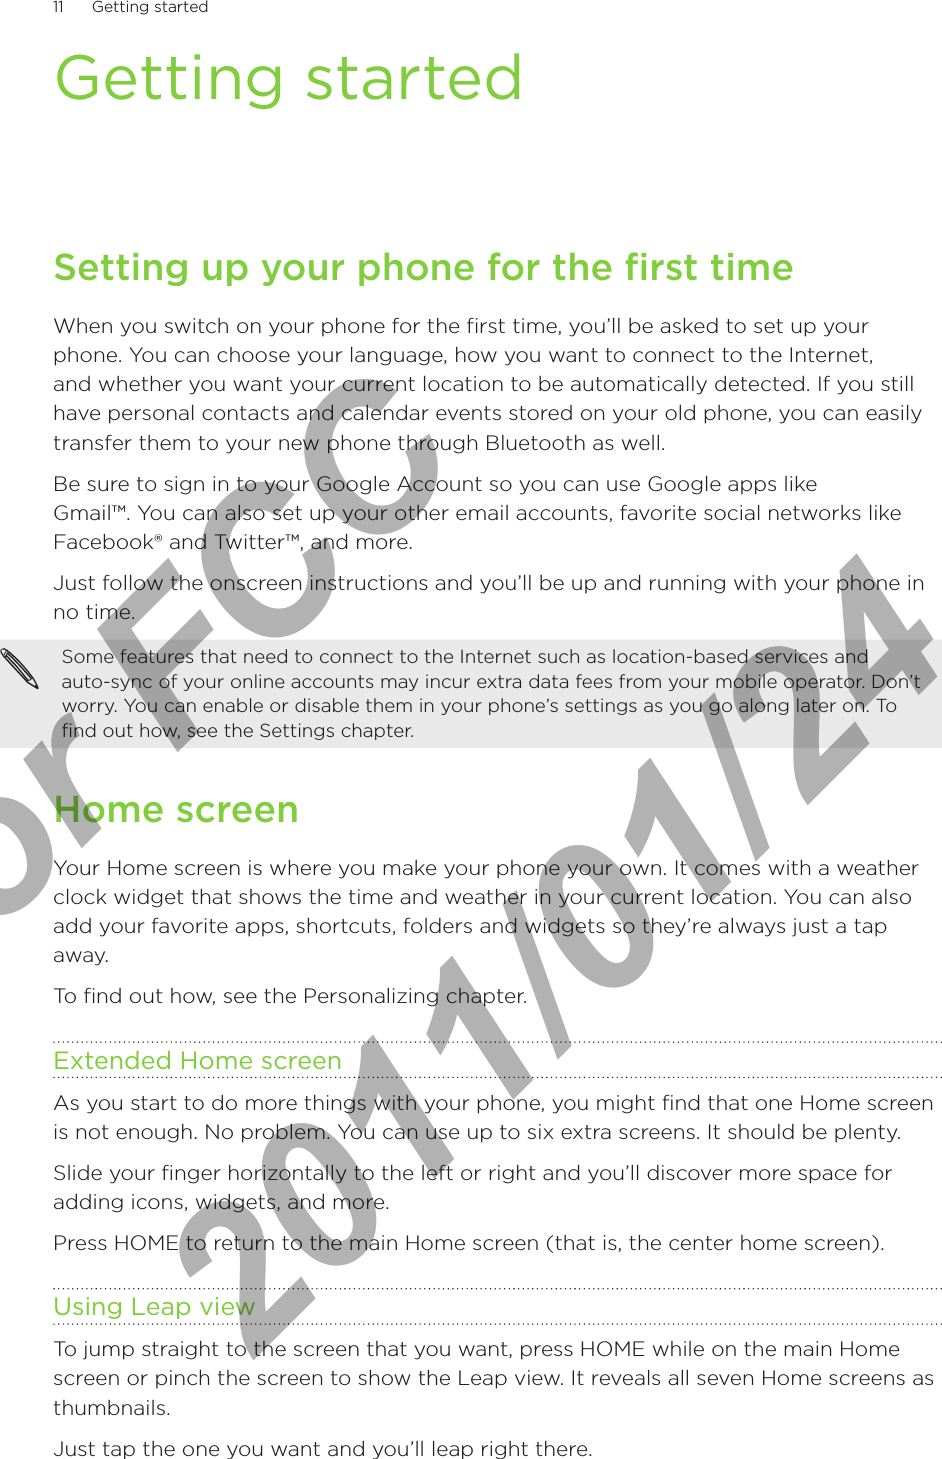 11      Getting started      Getting startedSetting up your phone for the first timeWhen you switch on your phone for the first time, you’ll be asked to set up your phone. You can choose your language, how you want to connect to the Internet, and whether you want your current location to be automatically detected. If you still have personal contacts and calendar events stored on your old phone, you can easily transfer them to your new phone through Bluetooth as well.Be sure to sign in to your Google Account so you can use Google apps like  Gmail™. You can also set up your other email accounts, favorite social networks like Facebook® and Twitter™, and more.Just follow the onscreen instructions and you’ll be up and running with your phone in no time.Some features that need to connect to the Internet such as location-based services and  auto-sync of your online accounts may incur extra data fees from your mobile operator. Don’t worry. You can enable or disable them in your phone’s settings as you go along later on. To find out how, see the Settings chapter.Home screenYour Home screen is where you make your phone your own. It comes with a weather clock widget that shows the time and weather in your current location. You can also add your favorite apps, shortcuts, folders and widgets so they’re always just a tap away.To find out how, see the Personalizing chapter.Extended Home screenAs you start to do more things with your phone, you might find that one Home screen is not enough. No problem. You can use up to six extra screens. It should be plenty.Slide your finger horizontally to the left or right and you’ll discover more space for adding icons, widgets, and more.Press HOME to return to the main Home screen (that is, the center home screen).Using Leap viewTo jump straight to the screen that you want, press HOME while on the main Home screen or pinch the screen to show the Leap view. It reveals all seven Home screens as thumbnails.Just tap the one you want and you’ll leap right there.For FCC  2011/01/24